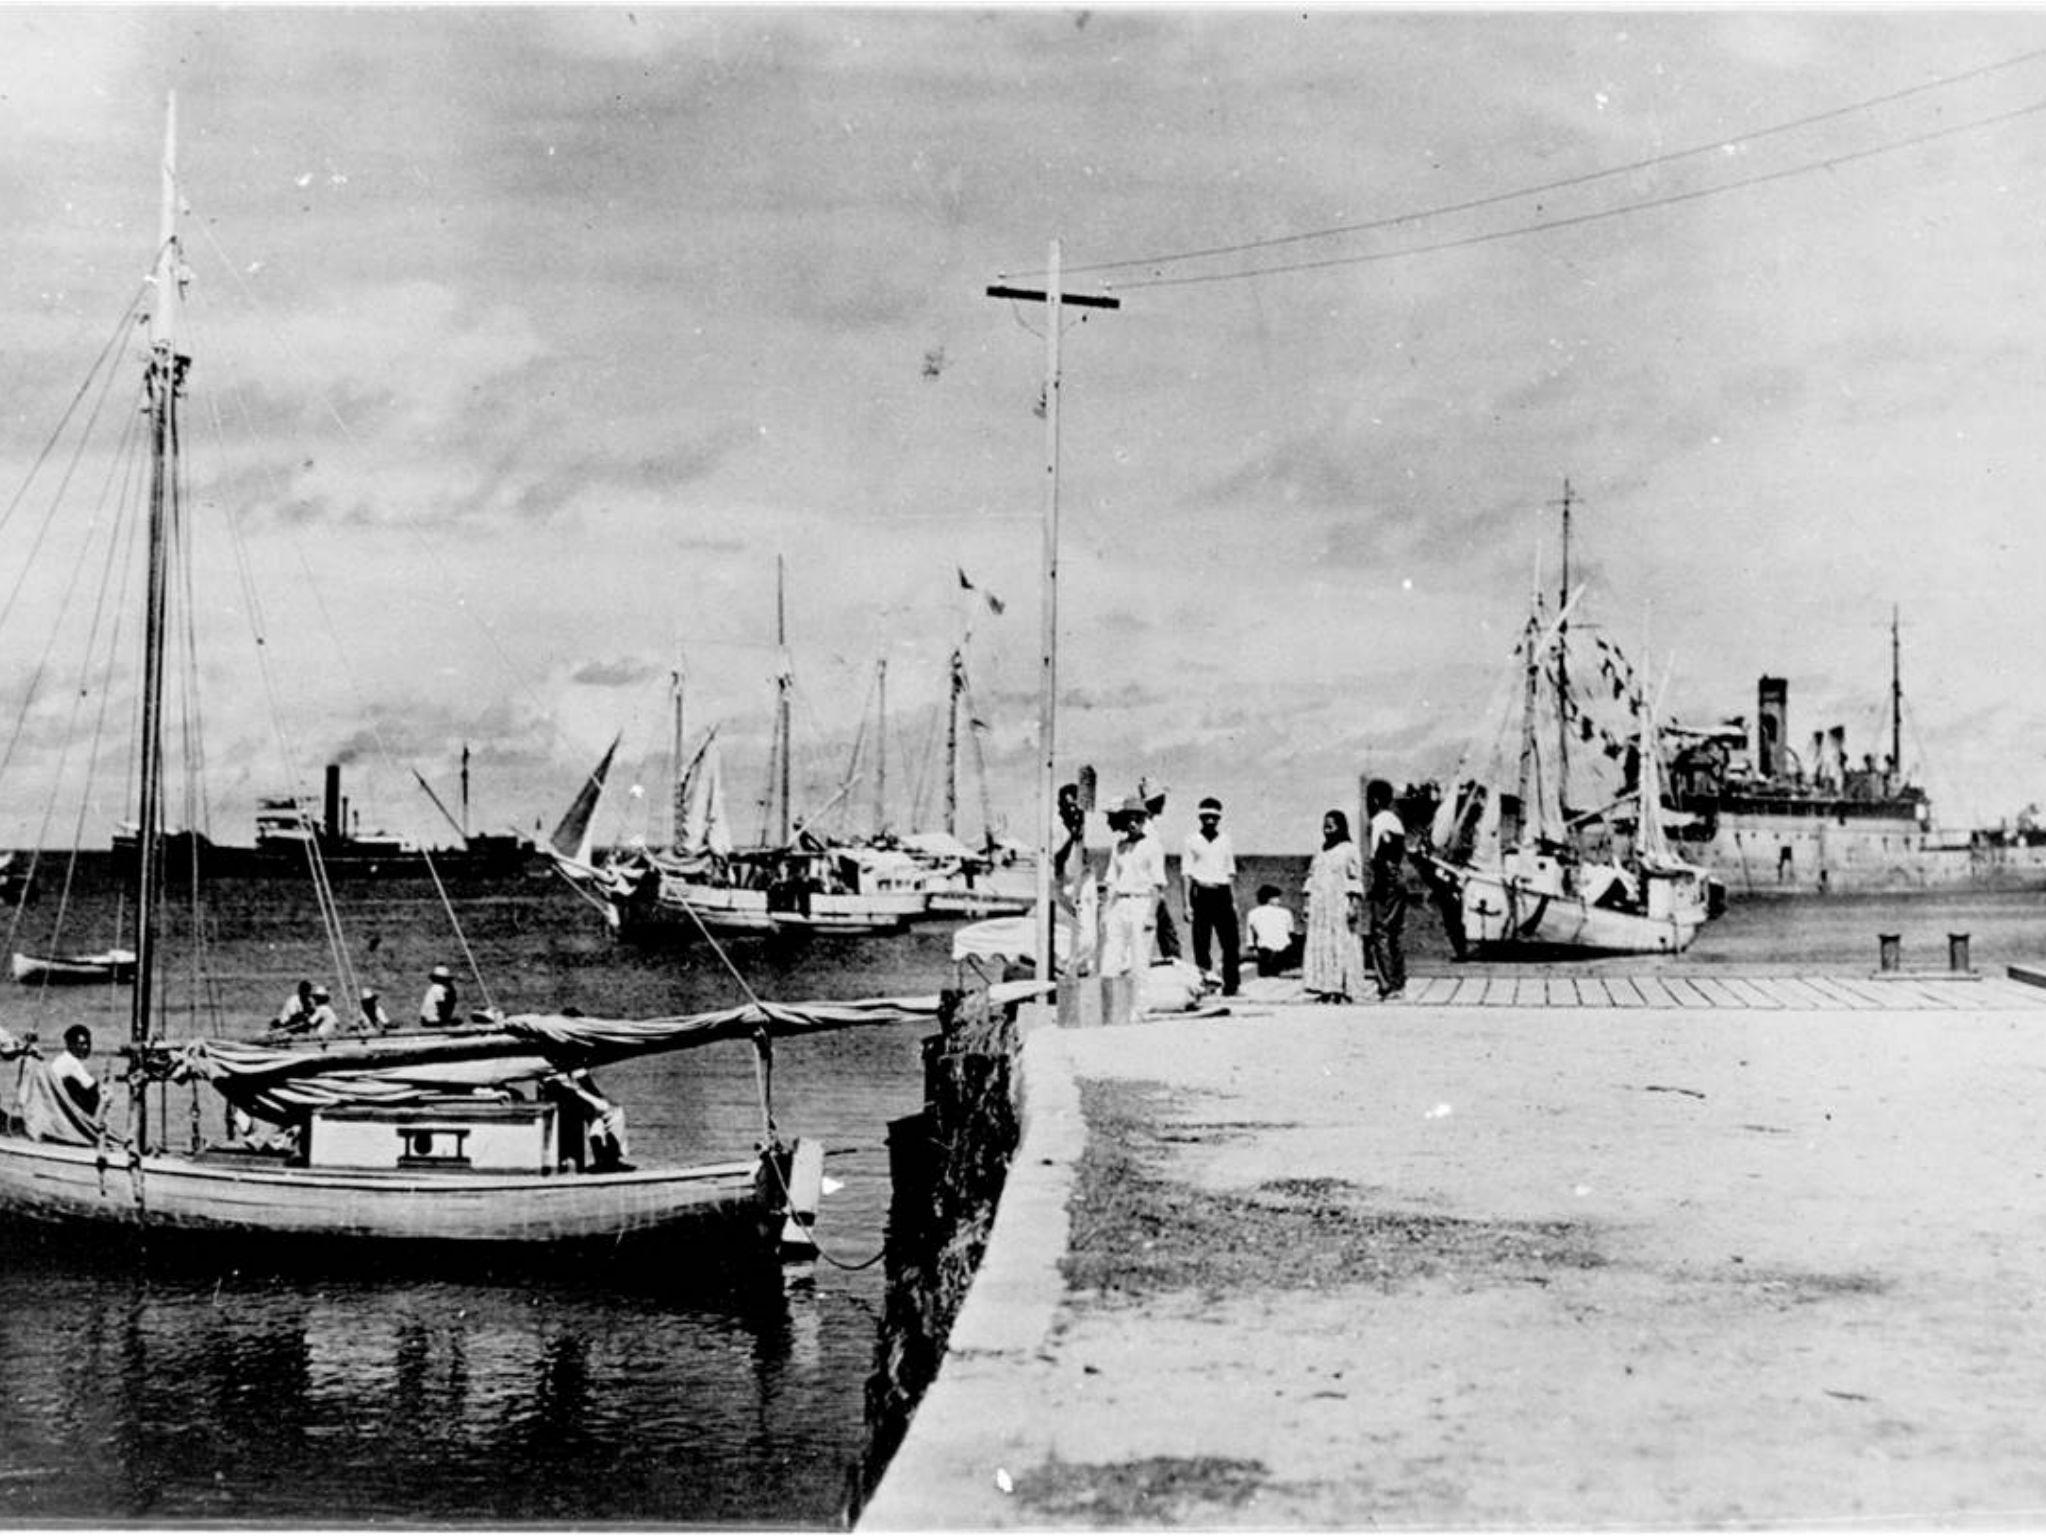 This photograph was cited as evidence that Earhart had been captured by the Japanese